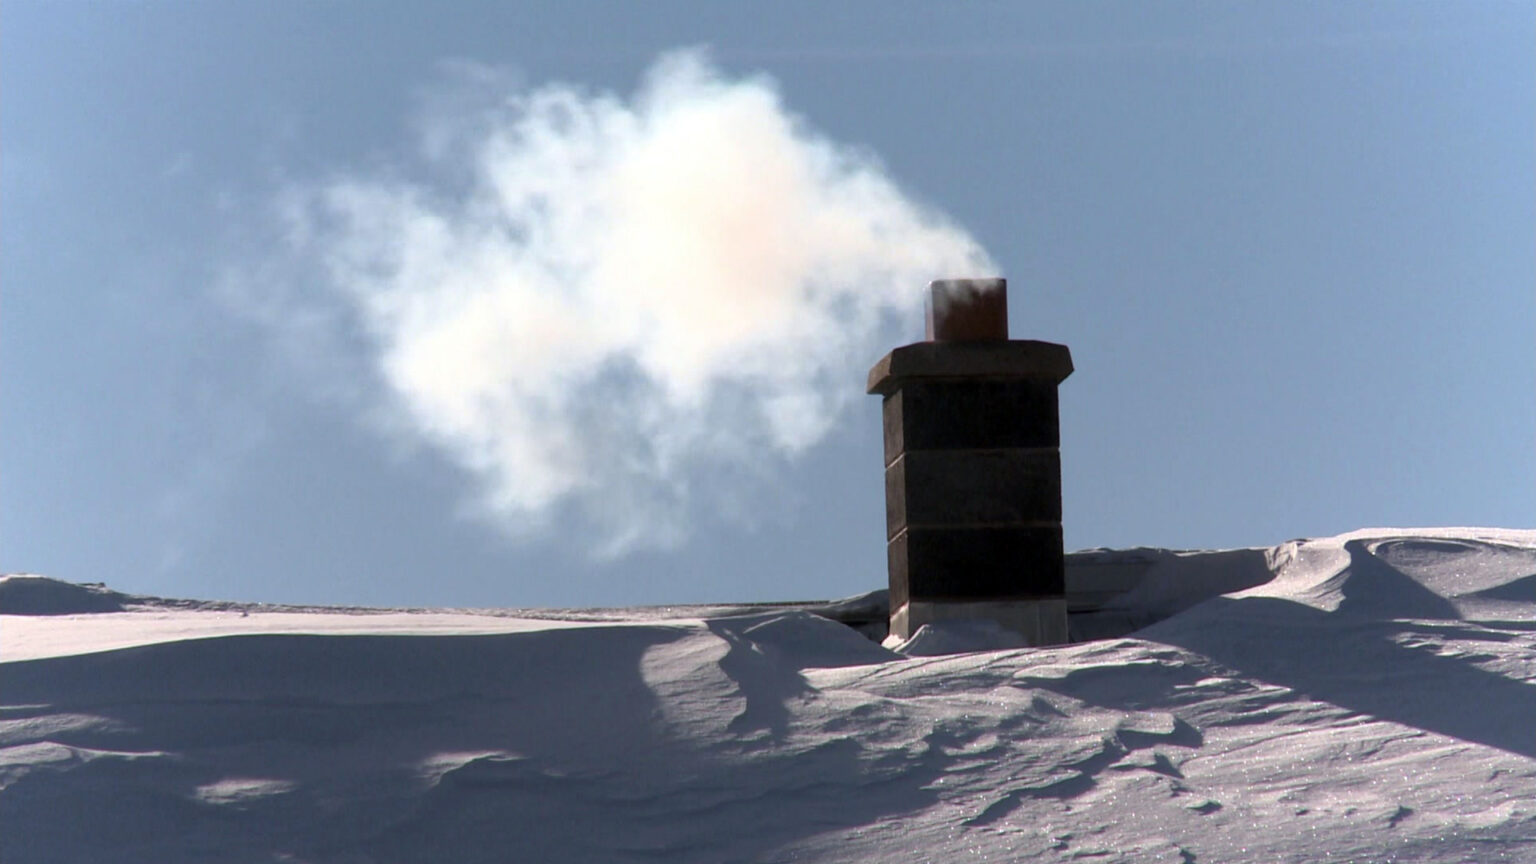 Smoke flows out of of a masonry chimney on a snow-covered roof.